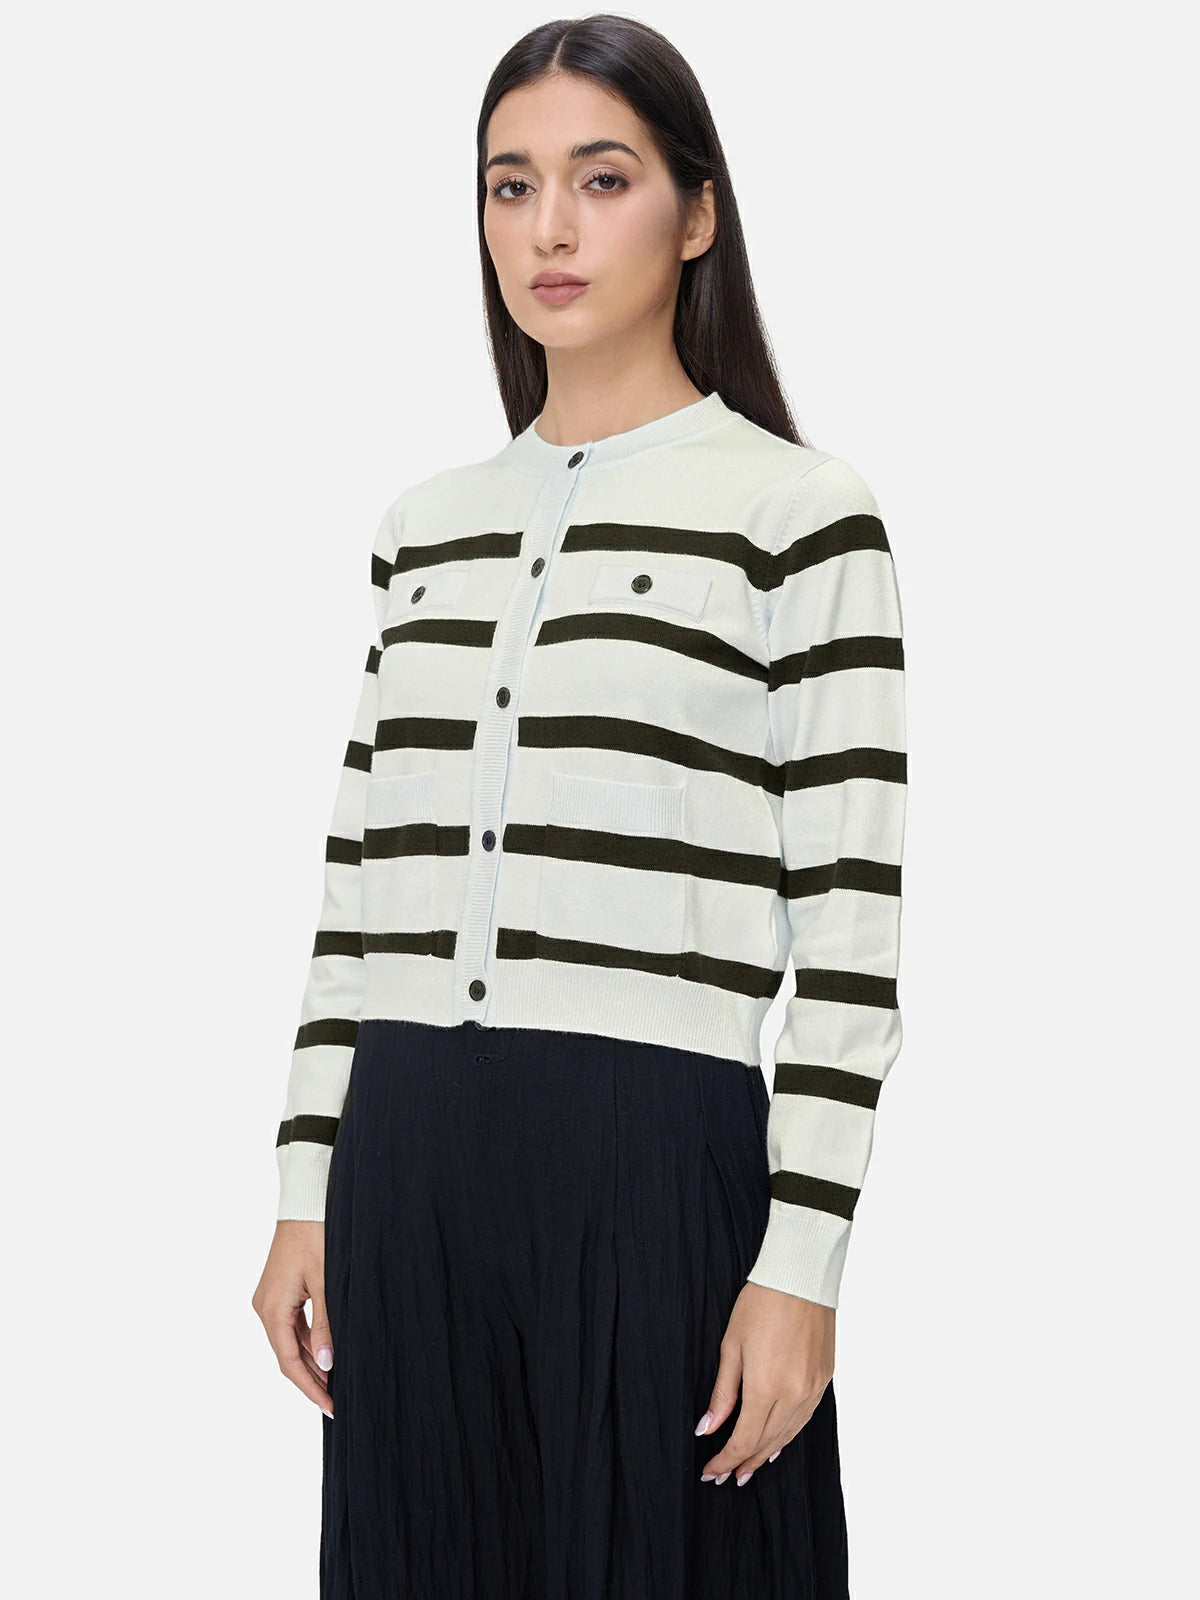 Confidently showcase a relaxed and stylish charm with this versatile cardigan sweater